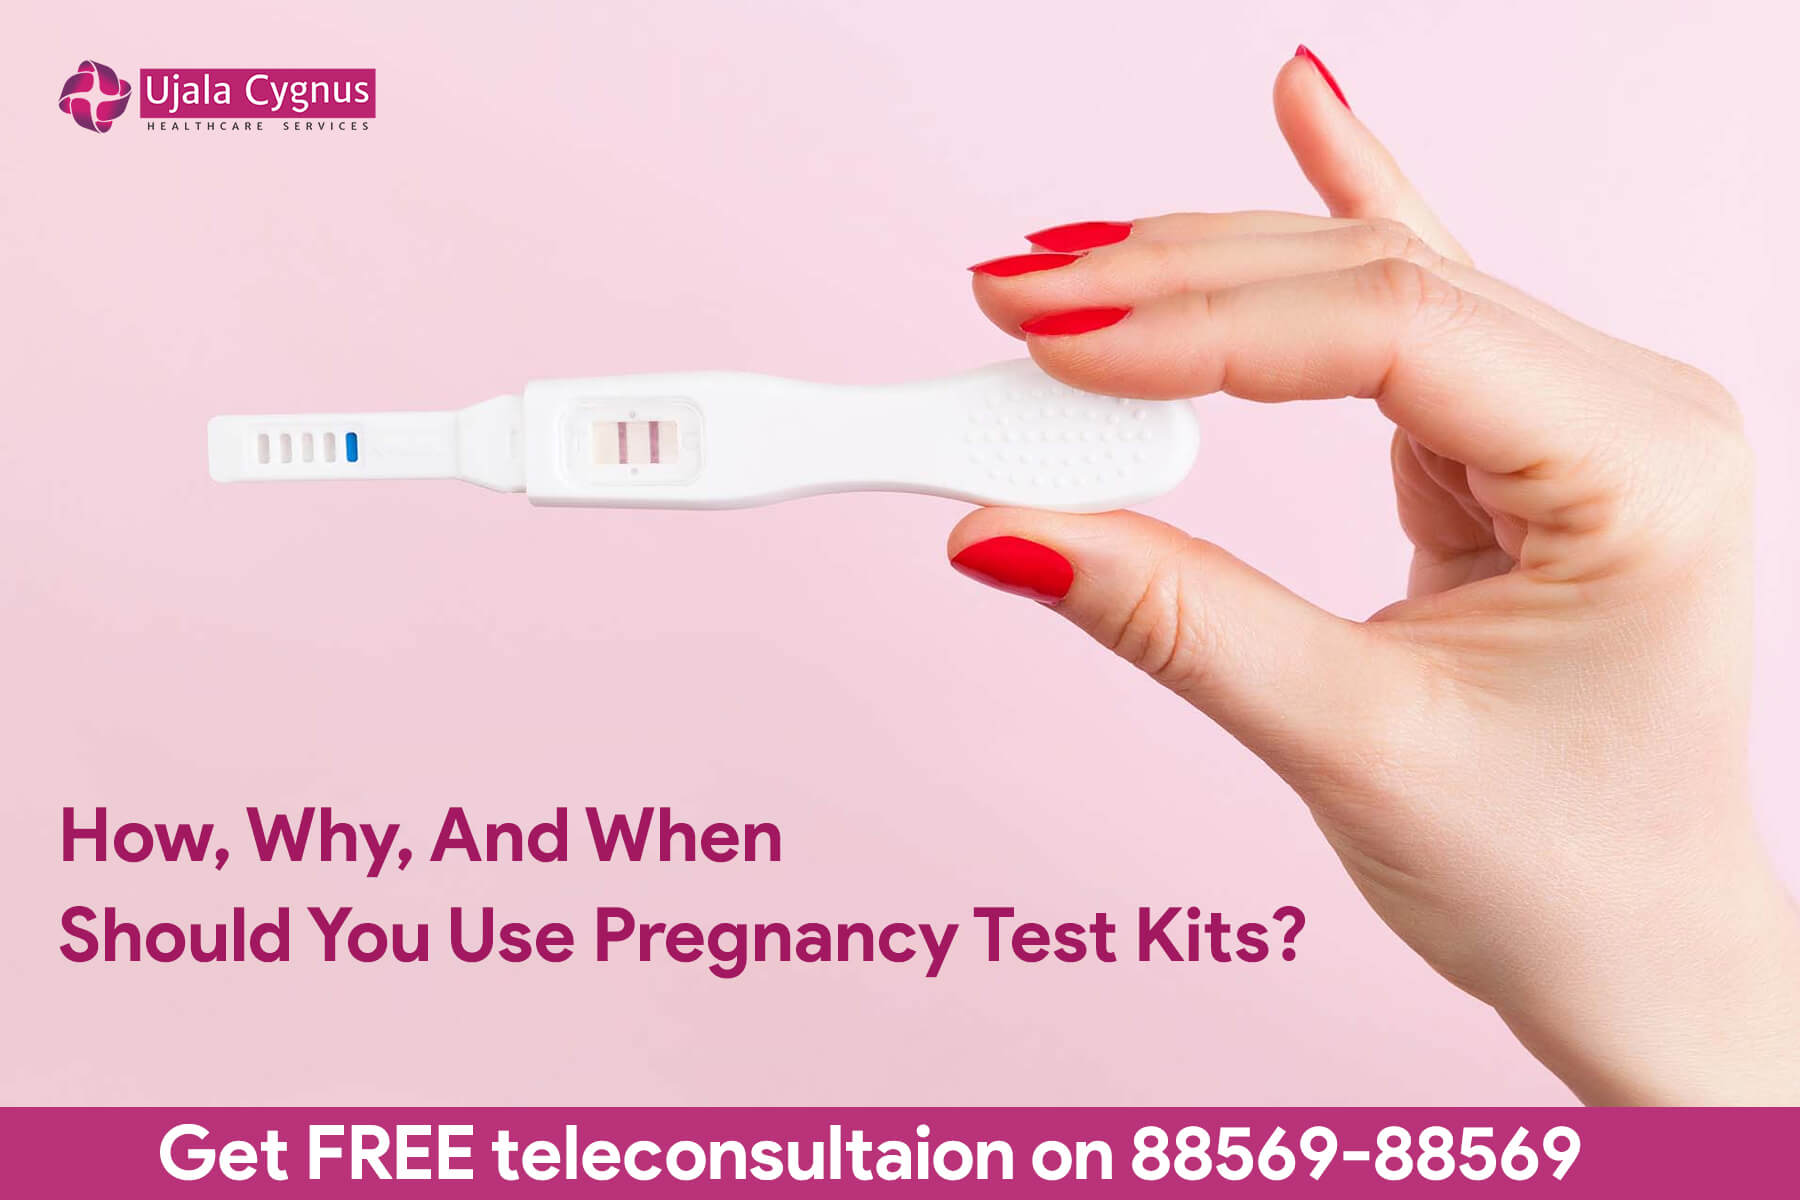 How, Why, And When Should You Use Pregnancy Test Kits?